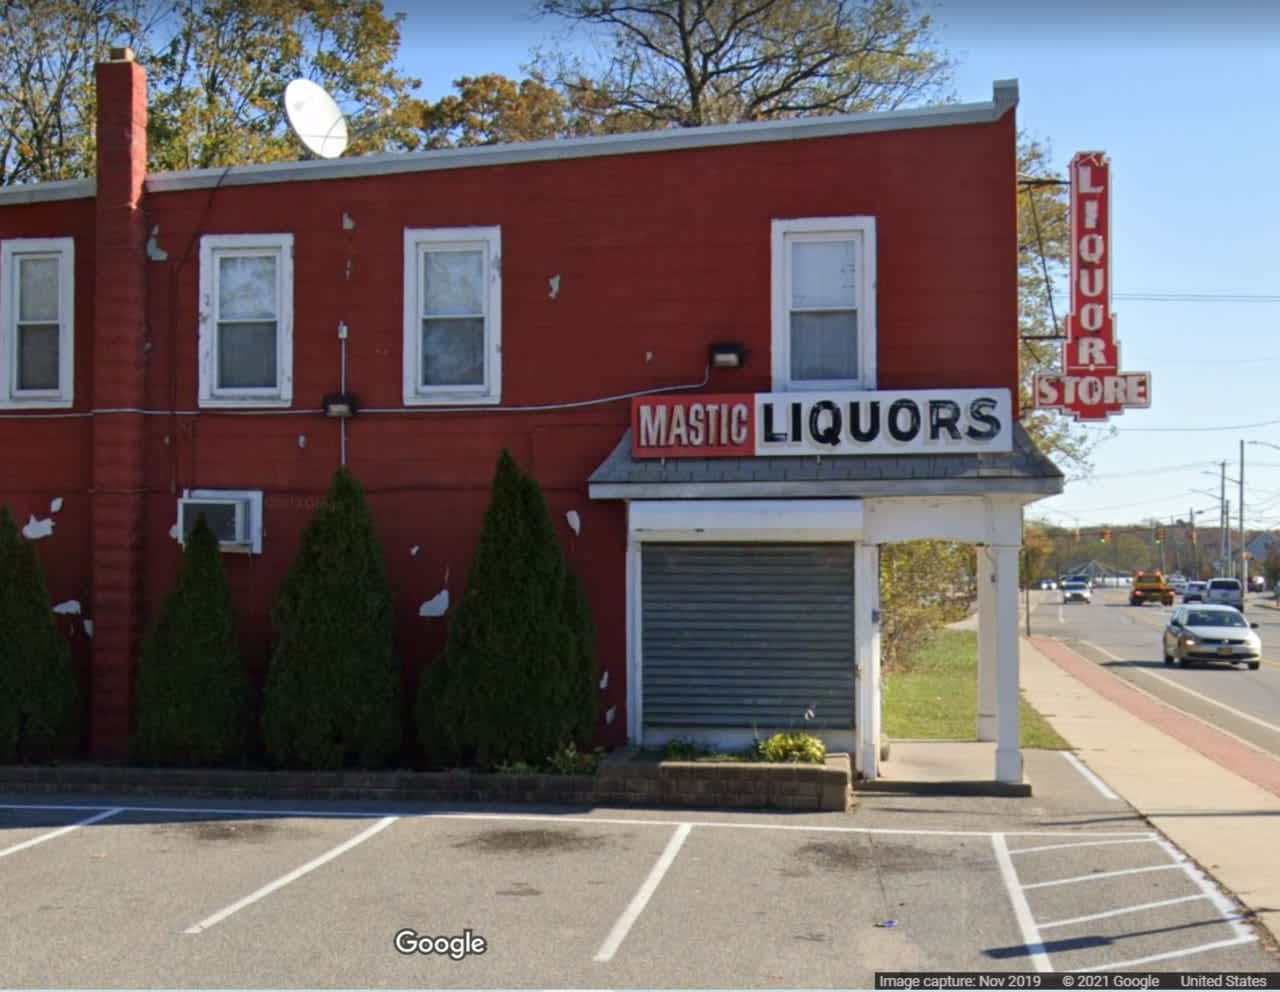 Police said one of the clerks who was charged was working at Mastic Liquors on Montauk Highway in Mastic.